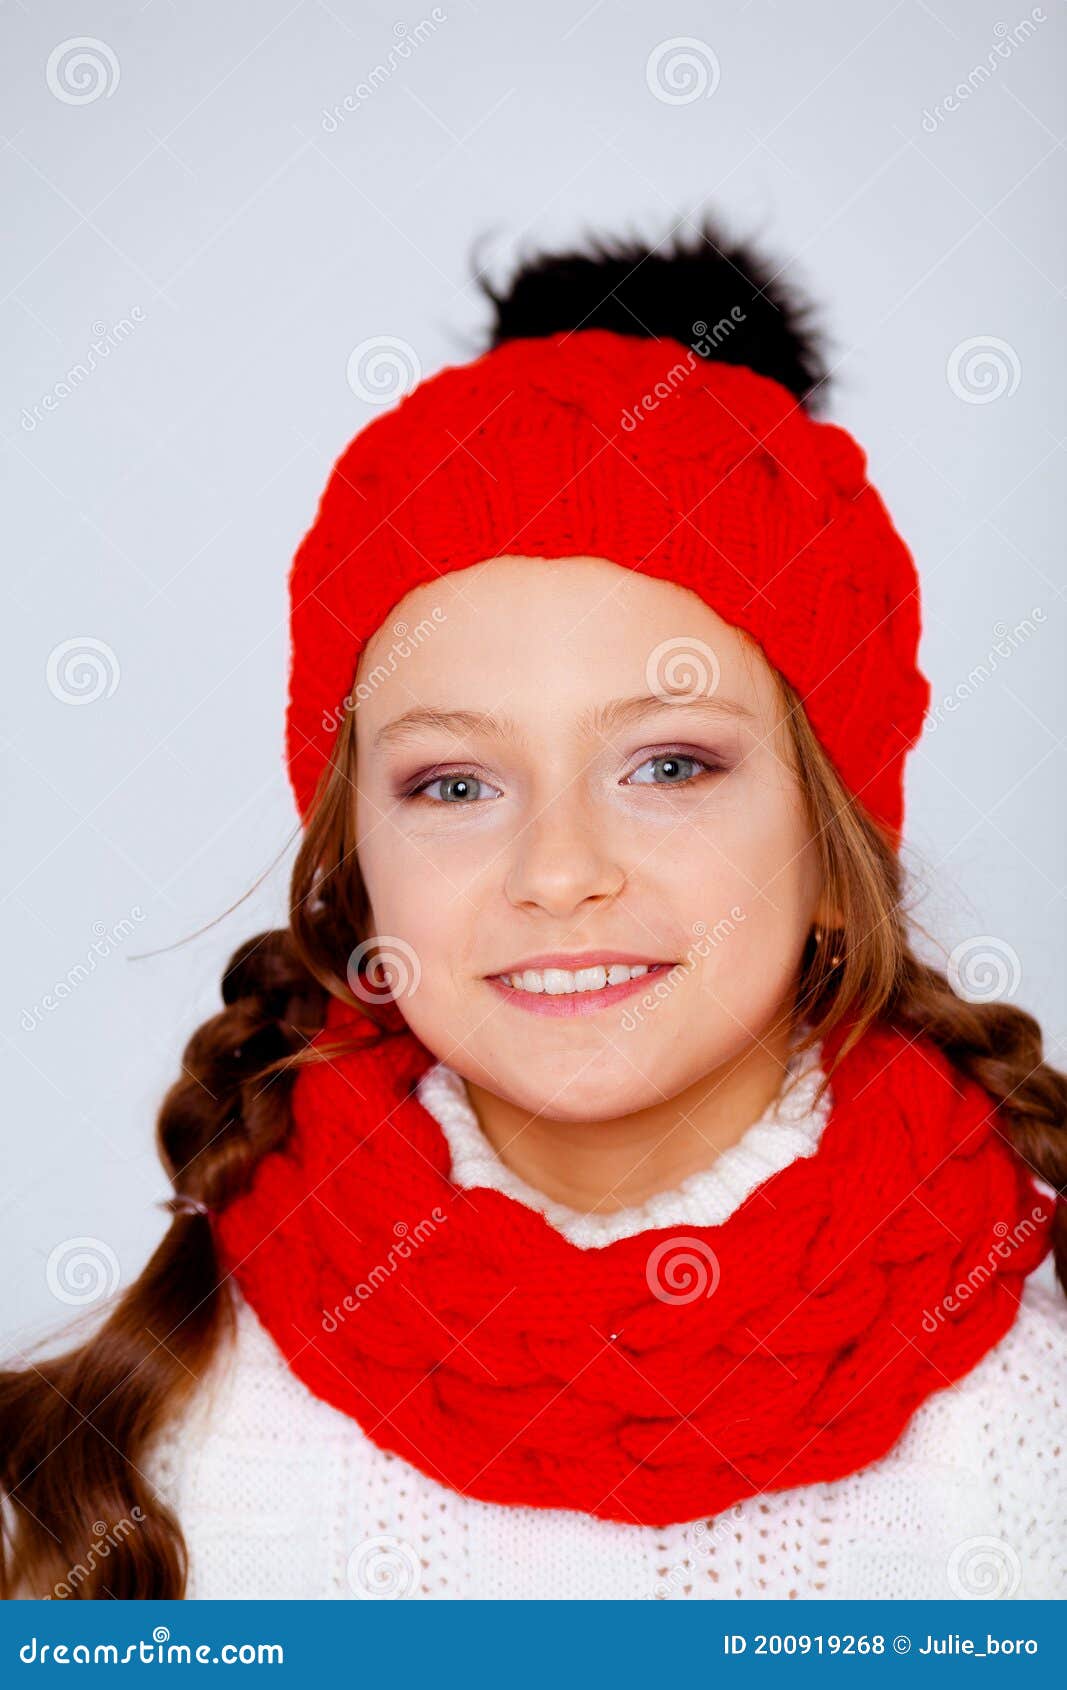 Dressed in Warm Winter Clothes Cute Girl Stock Photo - Image of ...